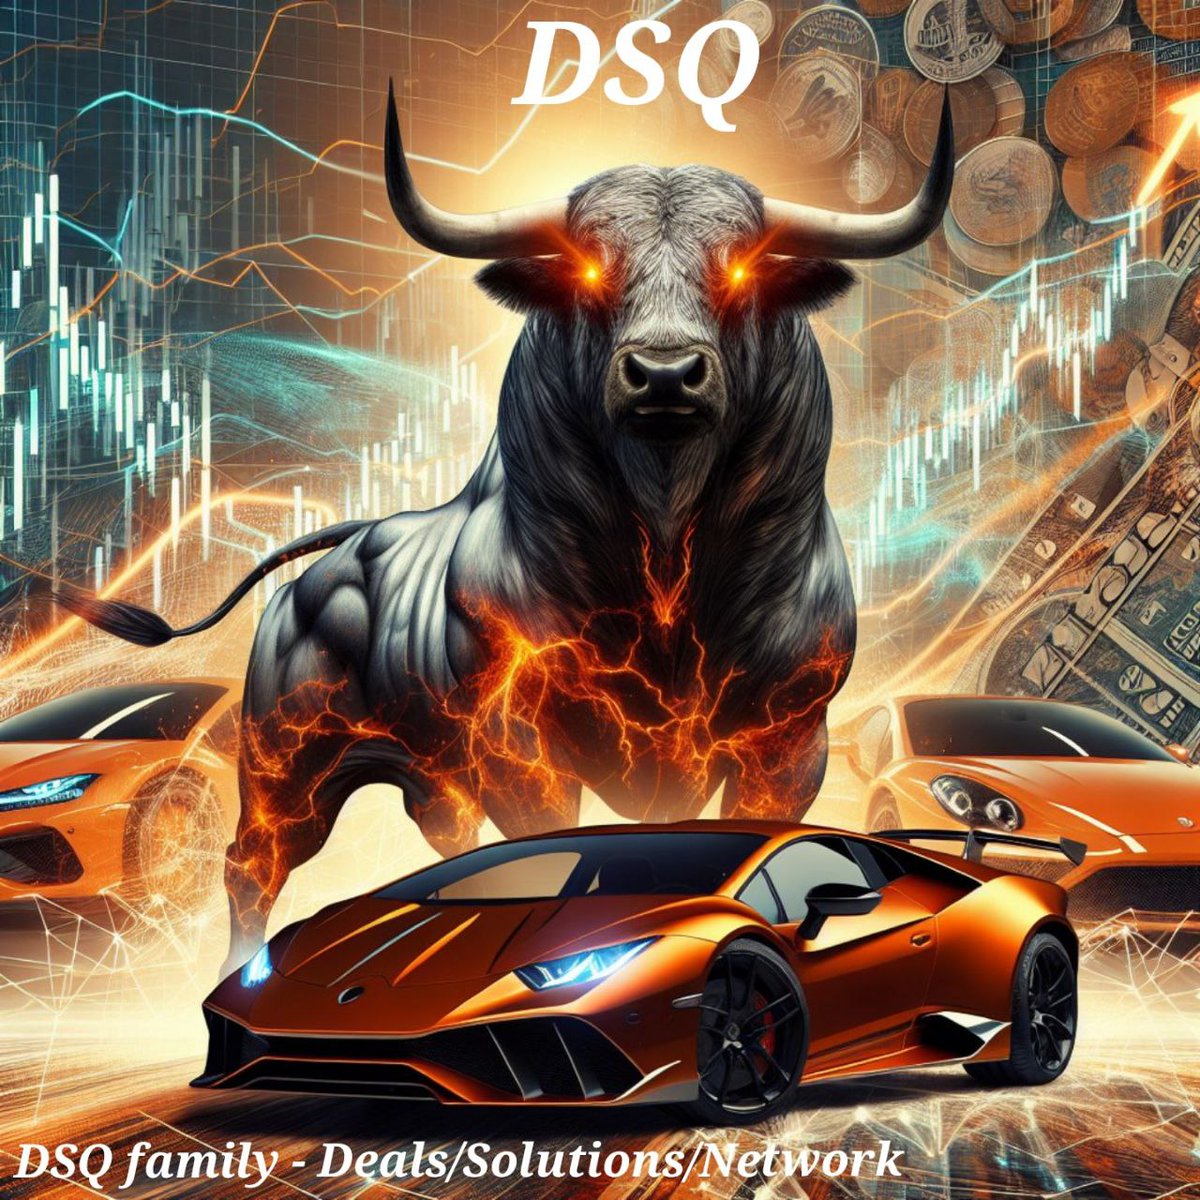 💼 #DSQ Solutions - Safety, Security, Adaptability    ▪︎ Token Launches i.e. $HashAI    ▪︎ #Web3 / Web2 Solutions & development #BusinessModel    ▪︎ They can build any solution in Web 2 & Web/3 across 30+ Blockchains    ▪︎ Whitepapers, Websites, Videos,